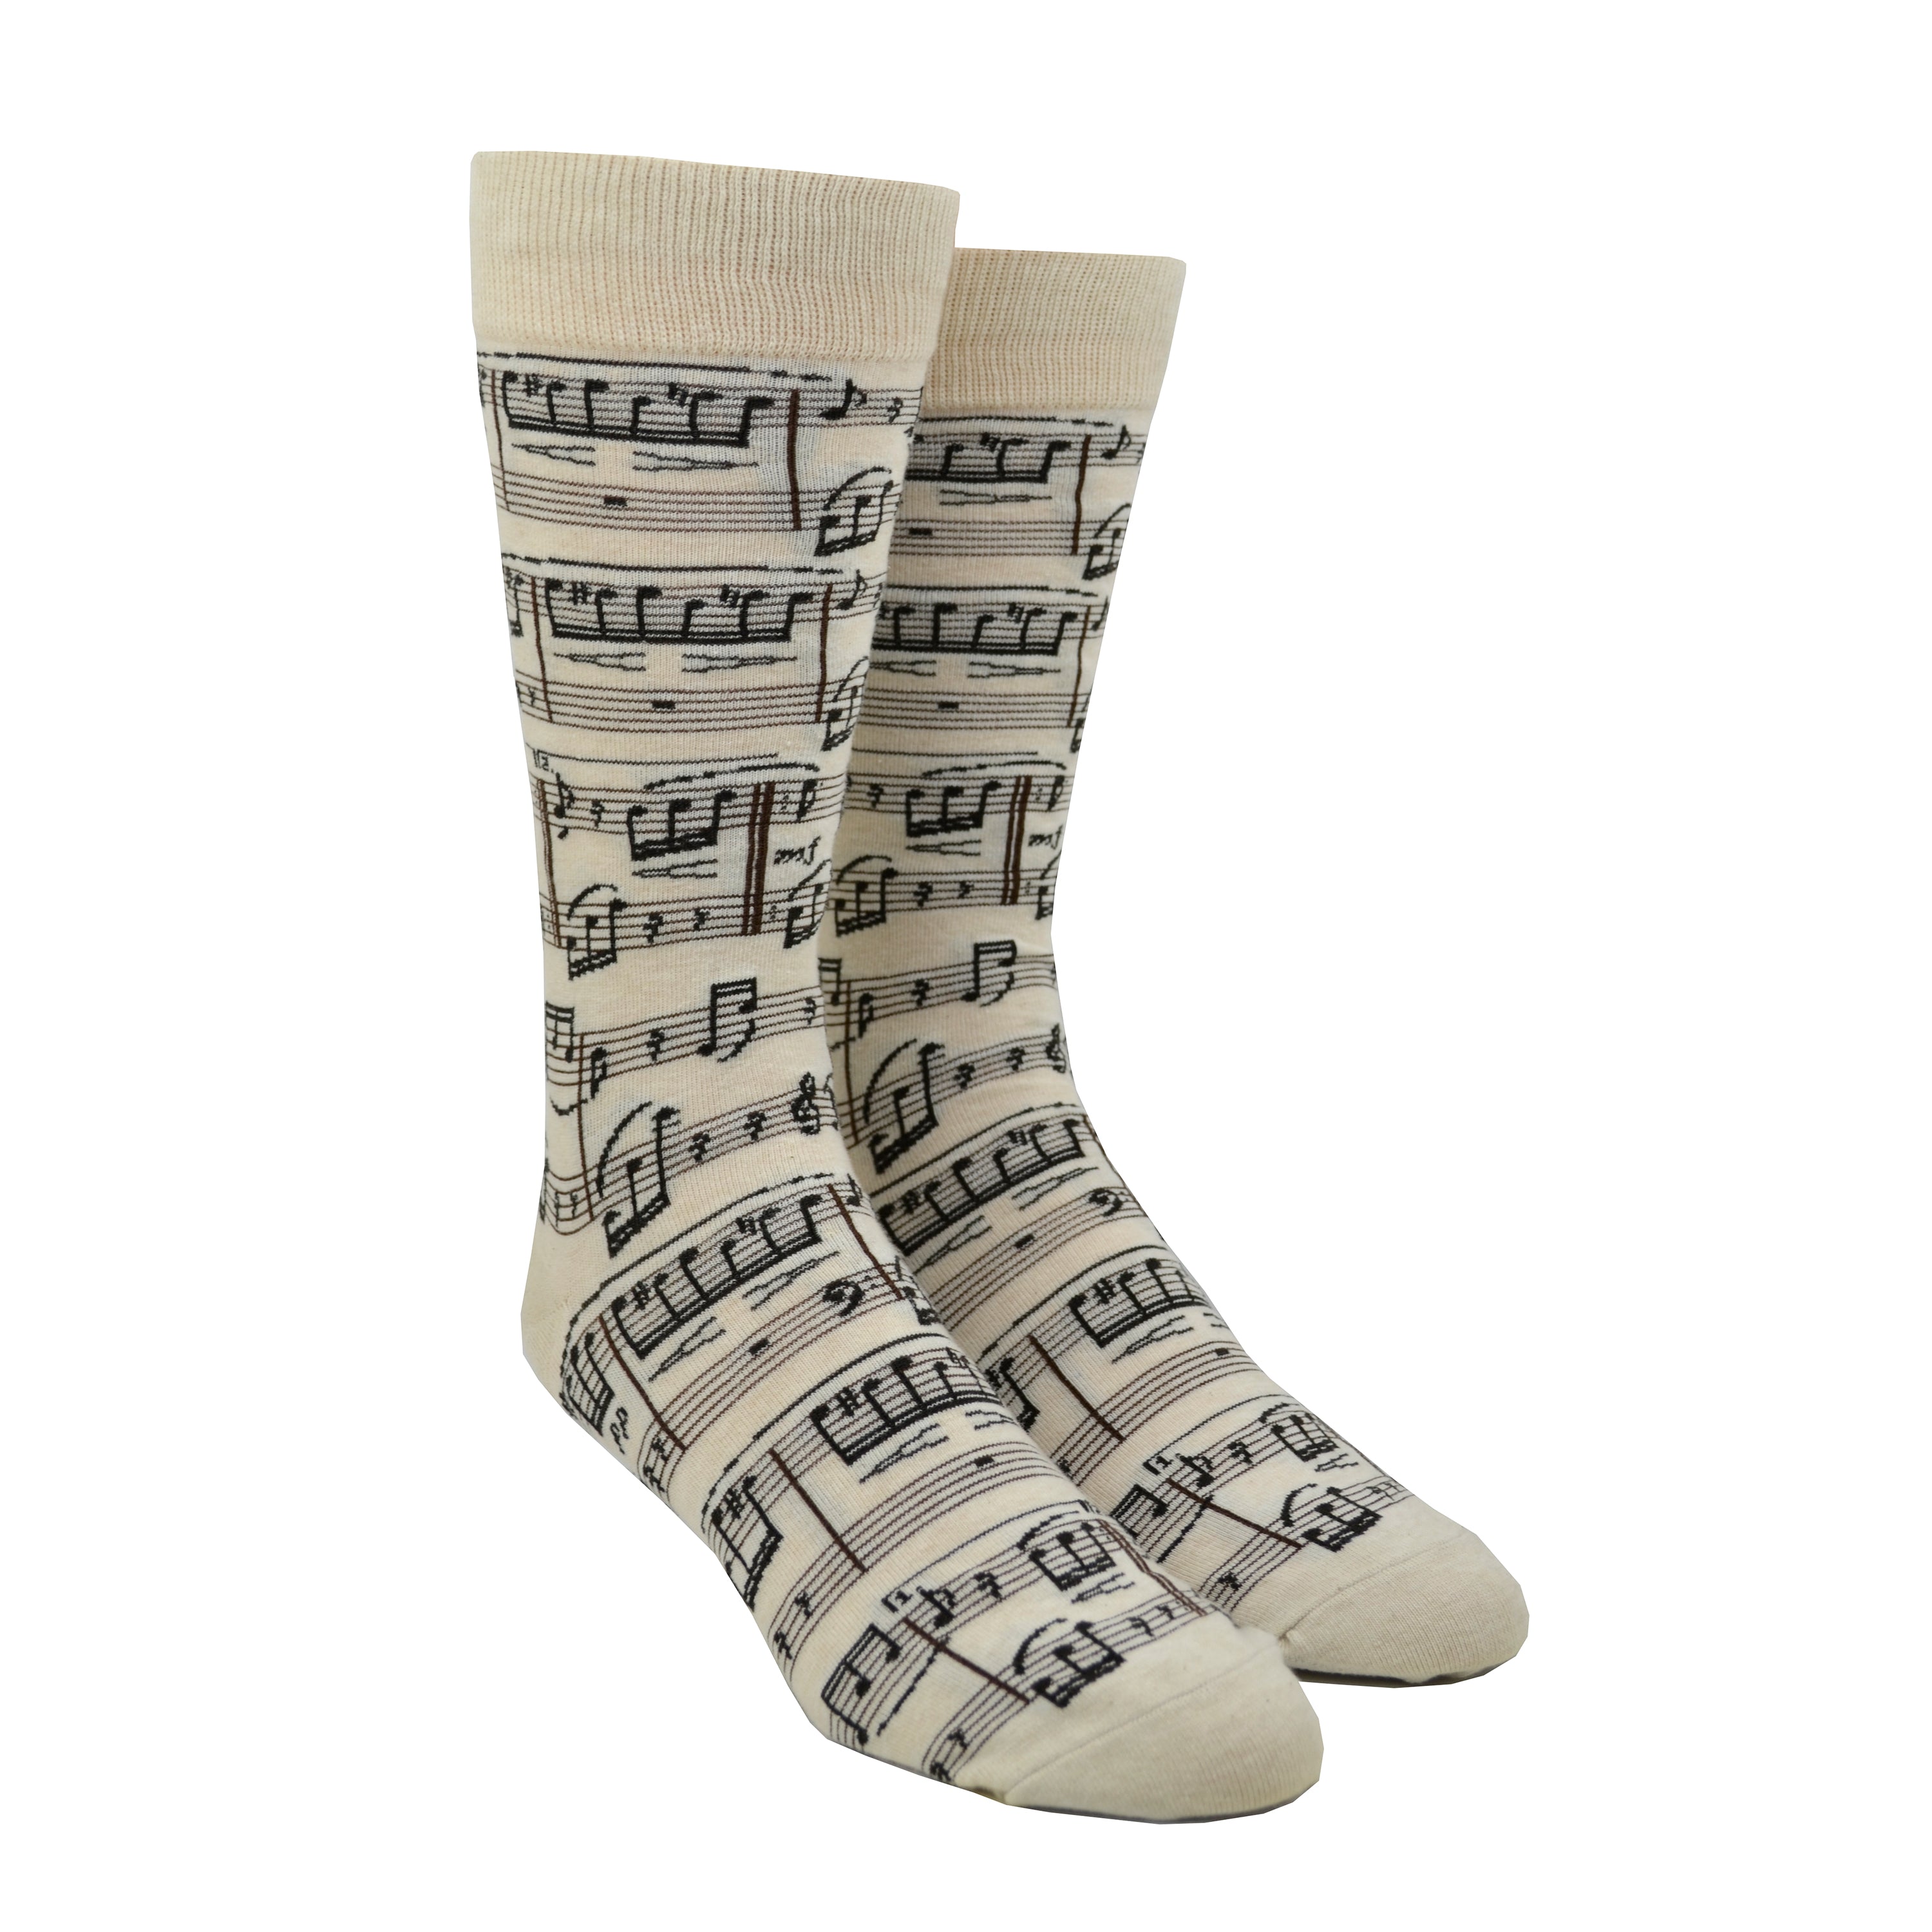 Sheet music covers a cream colored cotton men's sock by Modsock while displayed on a mannequin foot.